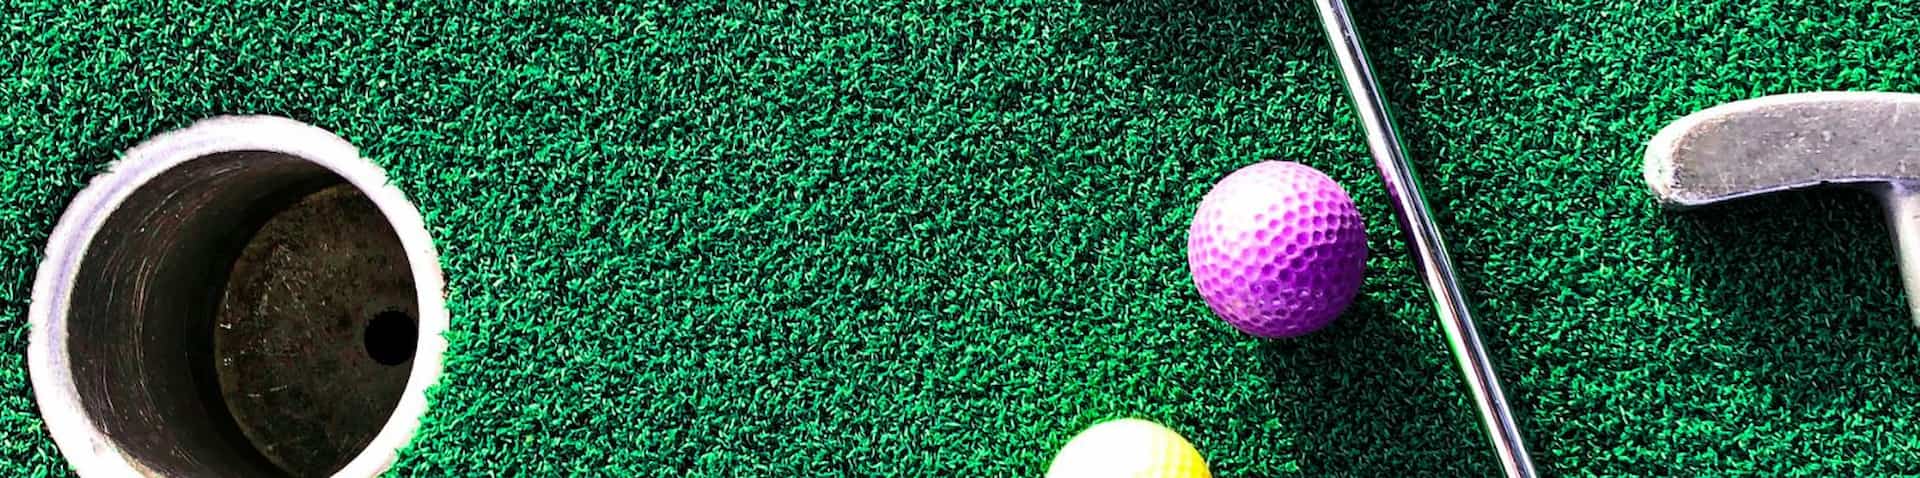 golf clubs and colorful balls on mini golf course